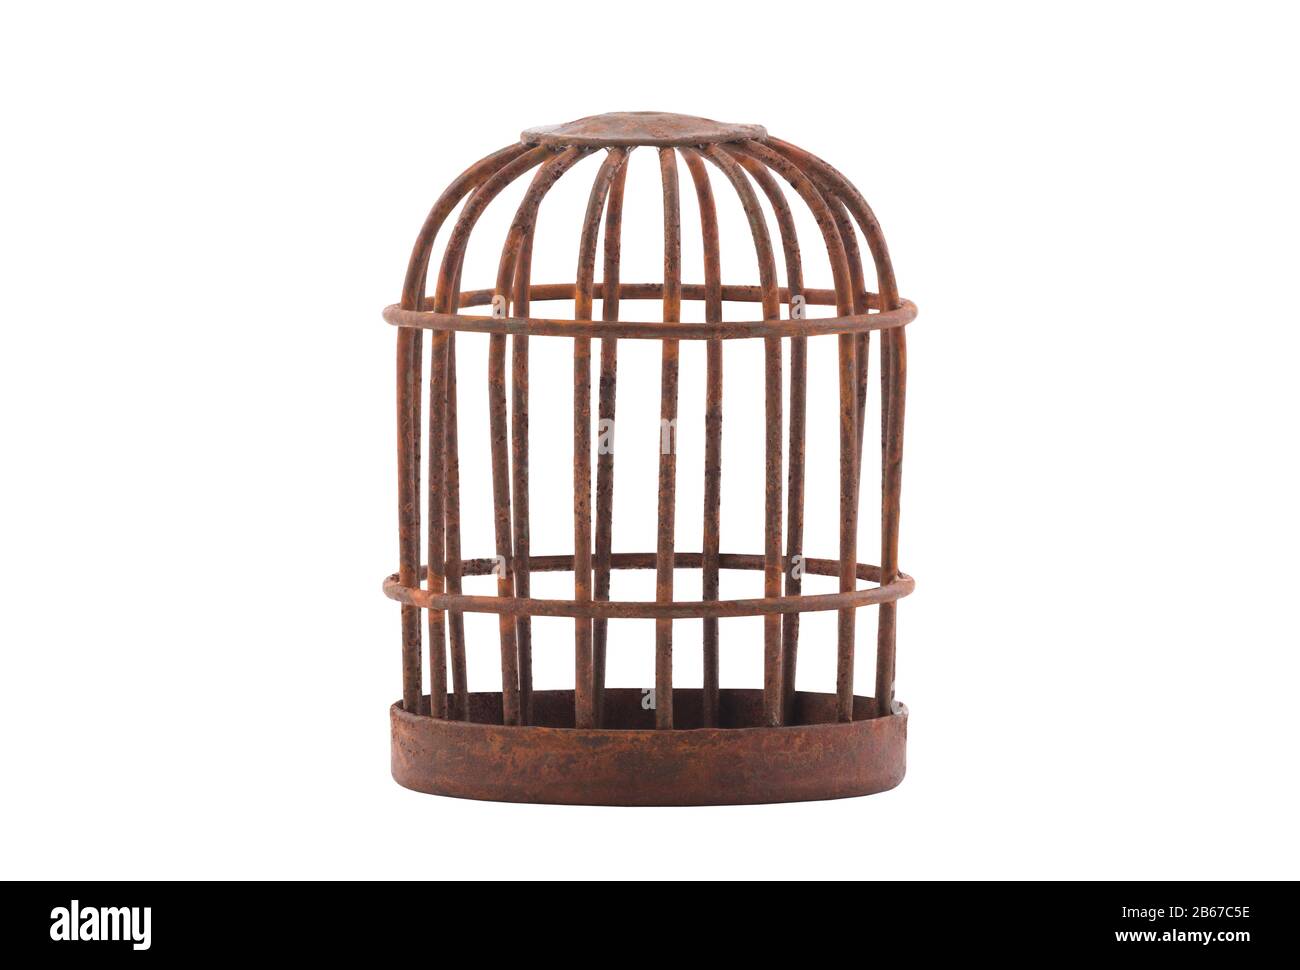 Retro rusty cage isolated on white background with clipping path Stock Photo